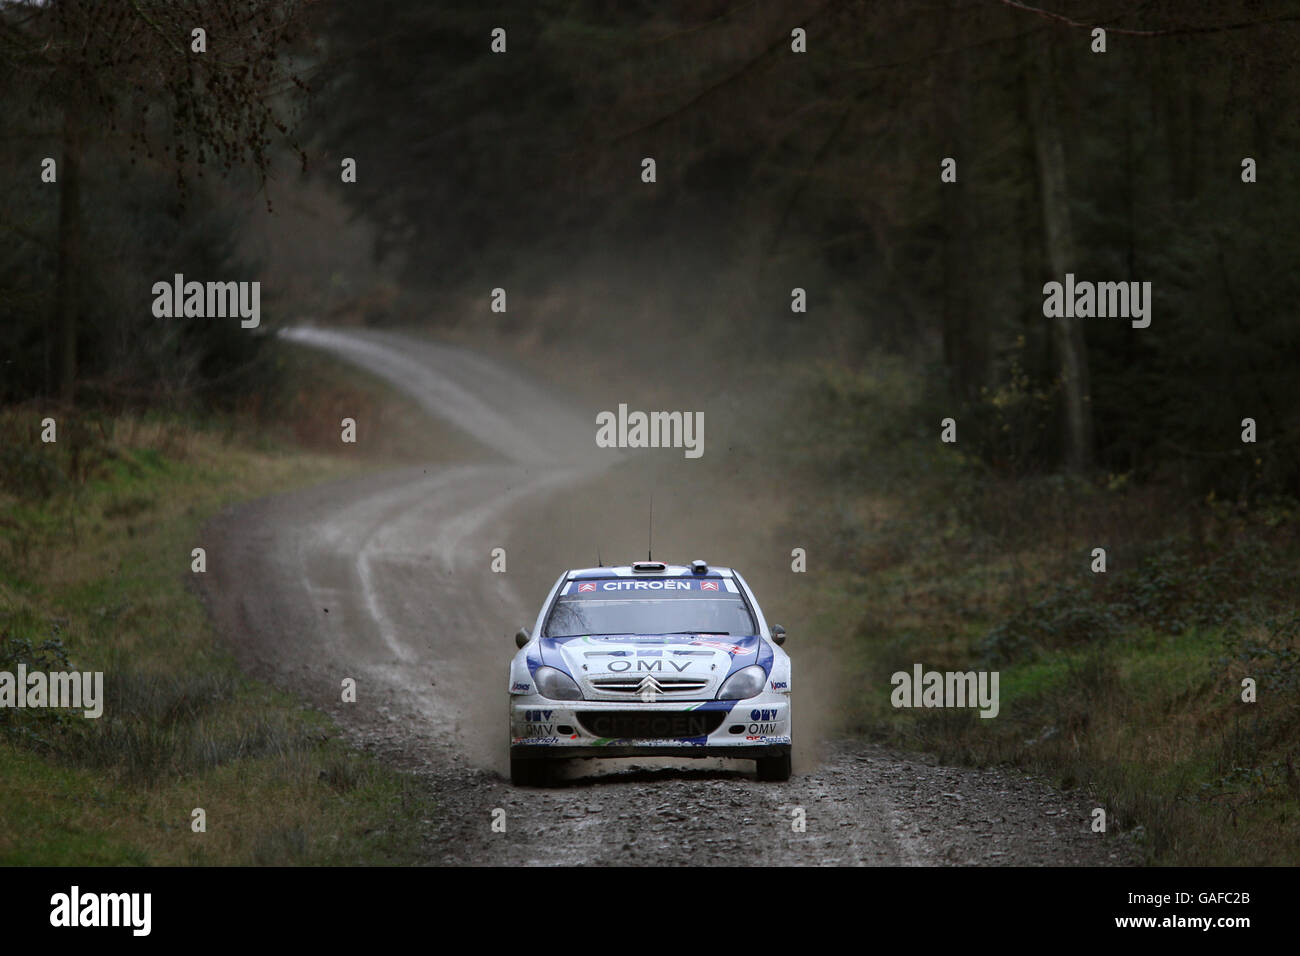 Manfred Stohl of Austria in the OMV Kronos Citroen C4 WRC in the Wales Rally GB. Stock Photo